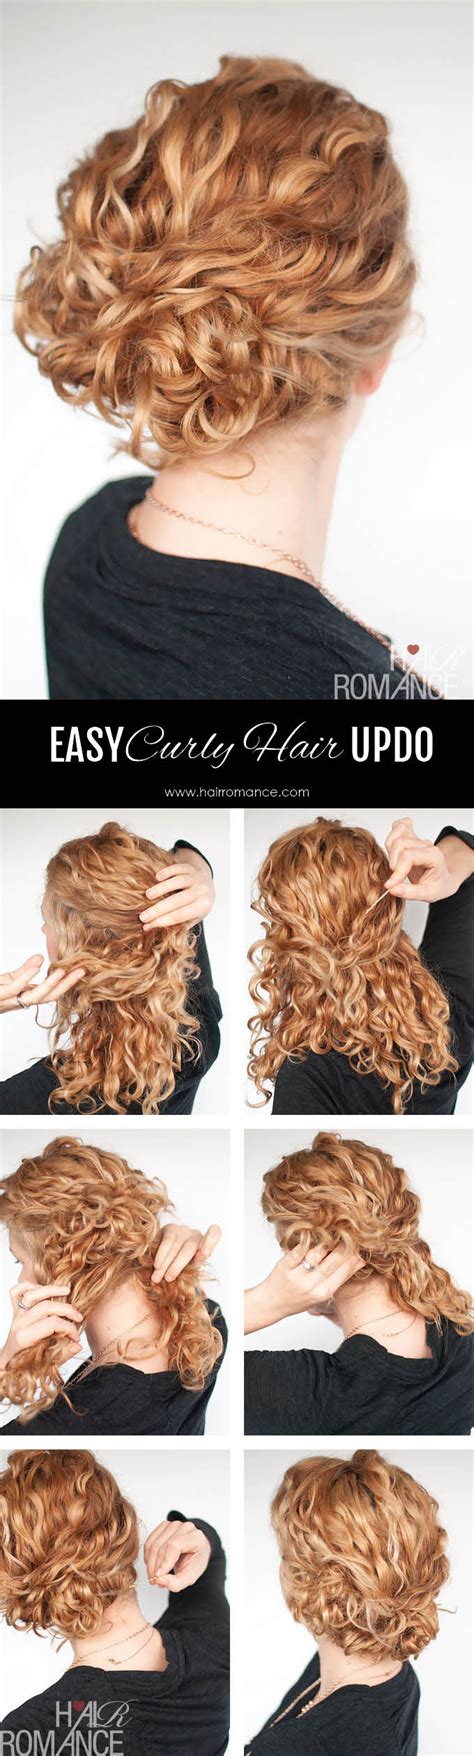 Super Easy Updo Hairstyle Tutorial For Curly Hair Hair Romance